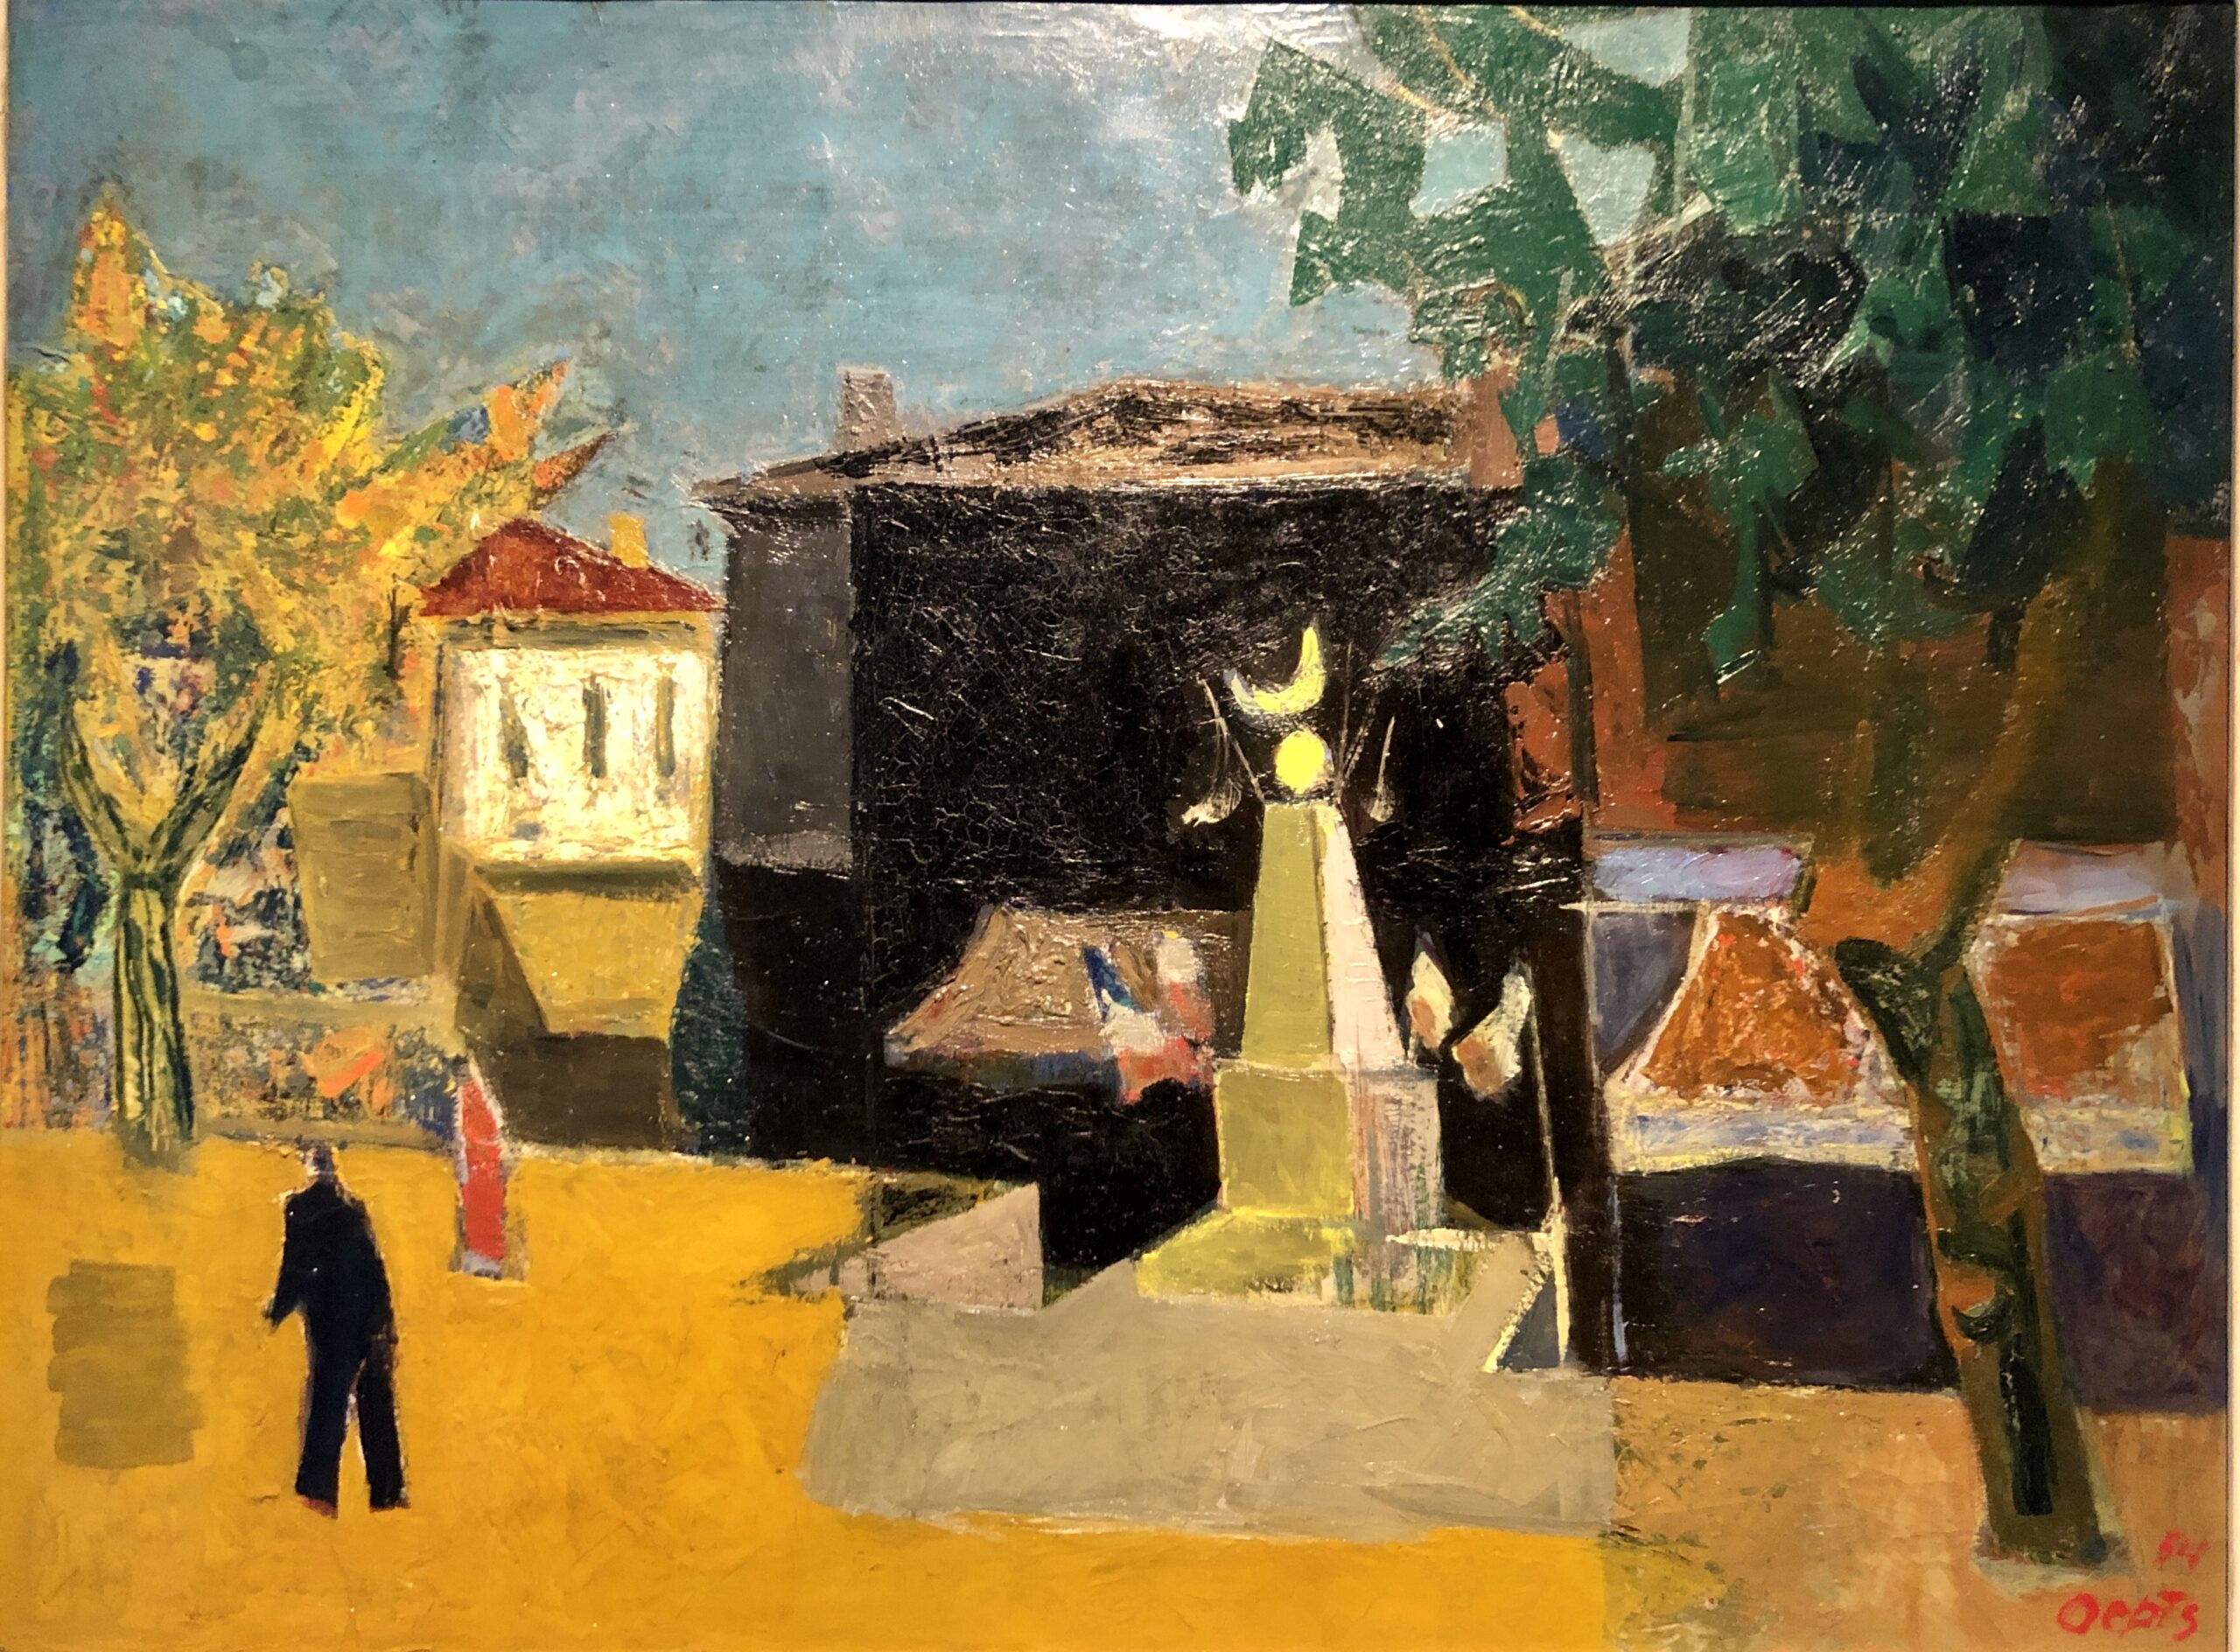  Wim Oepts' Memorial Sommières, as an example of a figurative painting with cubist, abstract elements